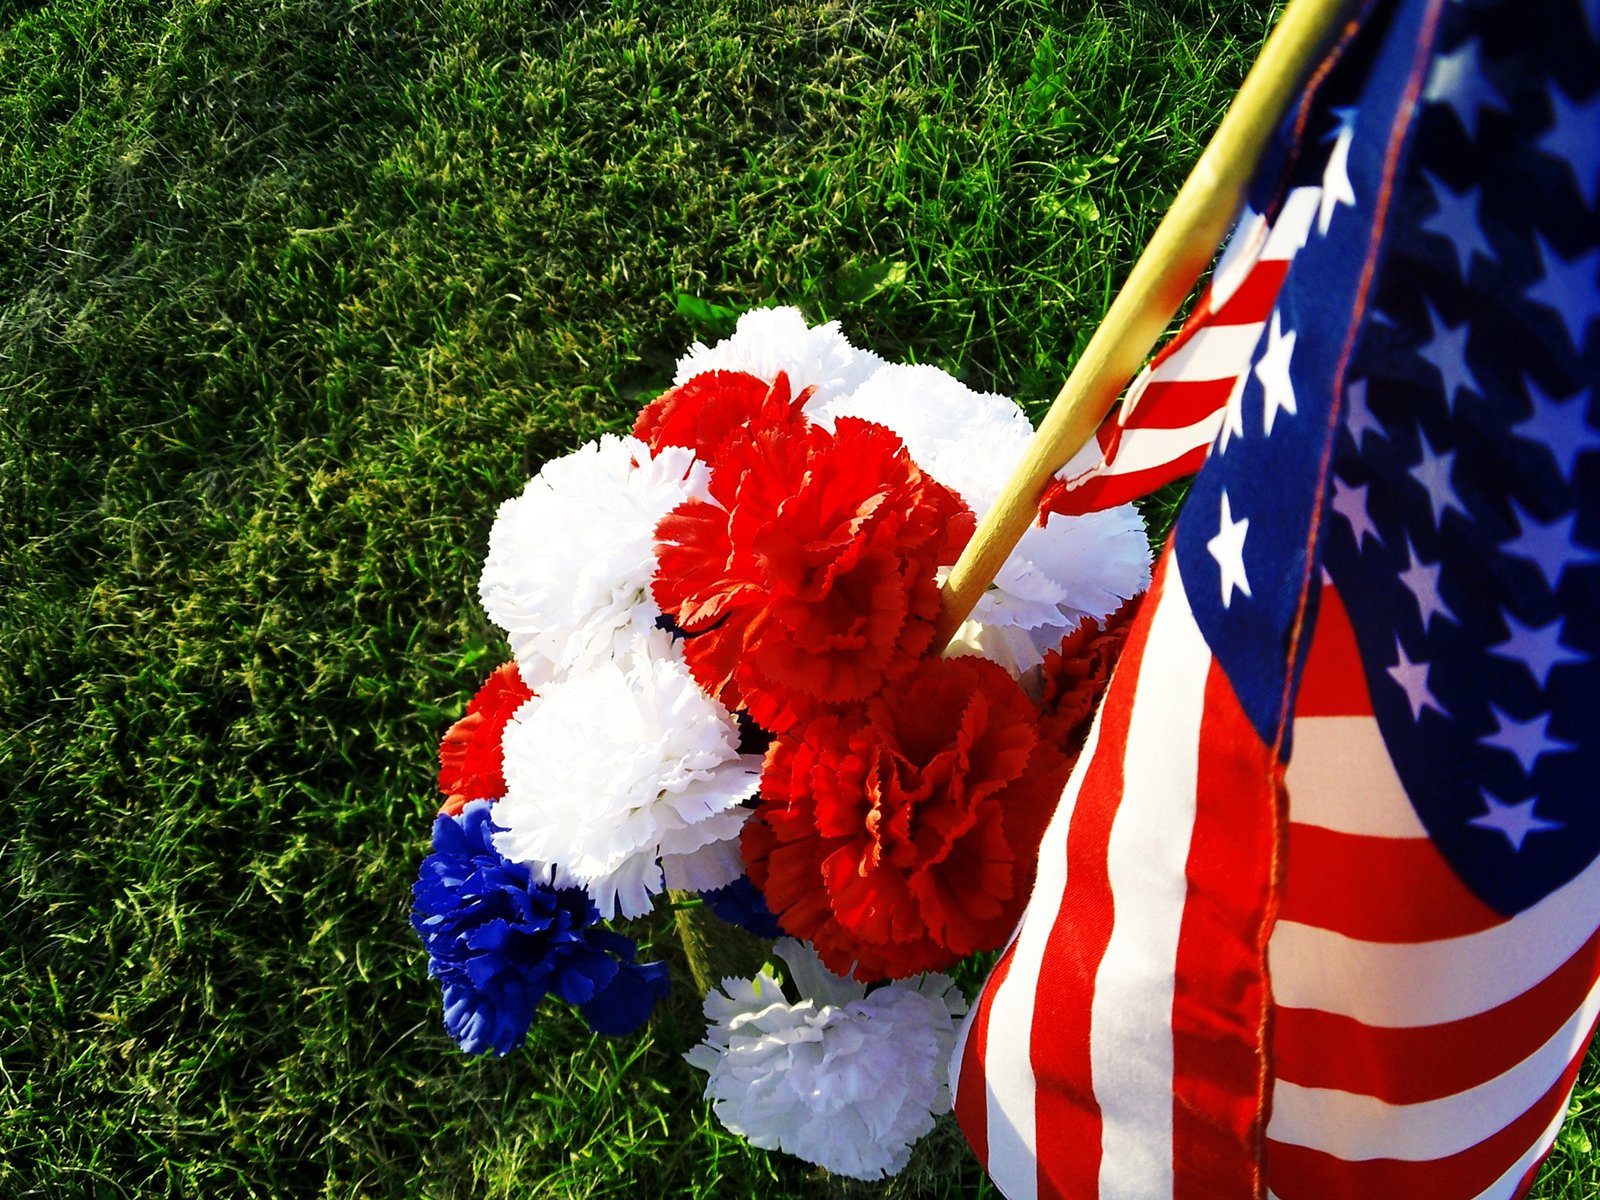 red, white and blue carnations sit near an american flag